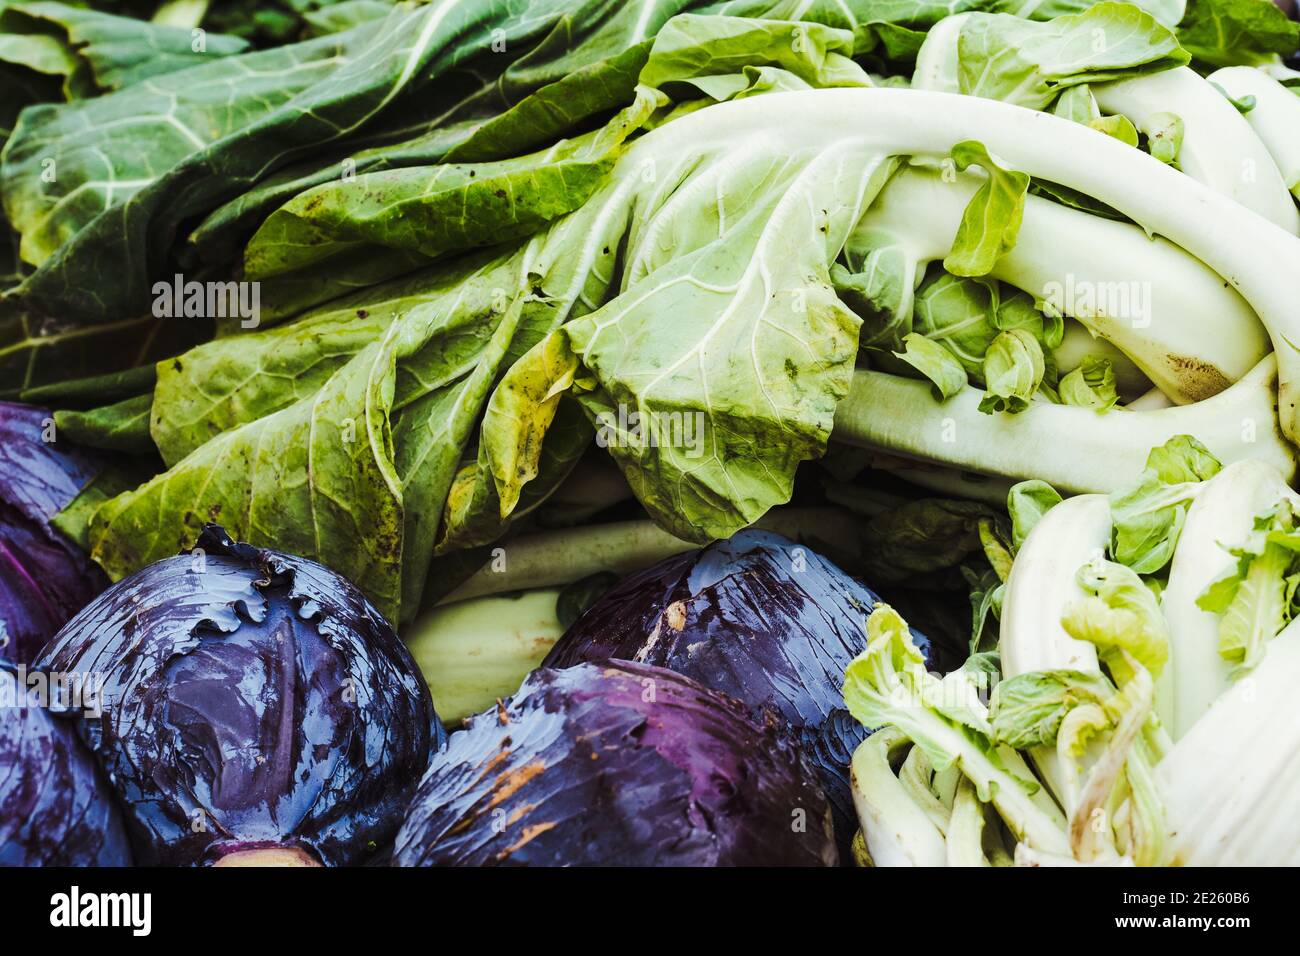 Raw winter vegetables in a market stall Stock Photo